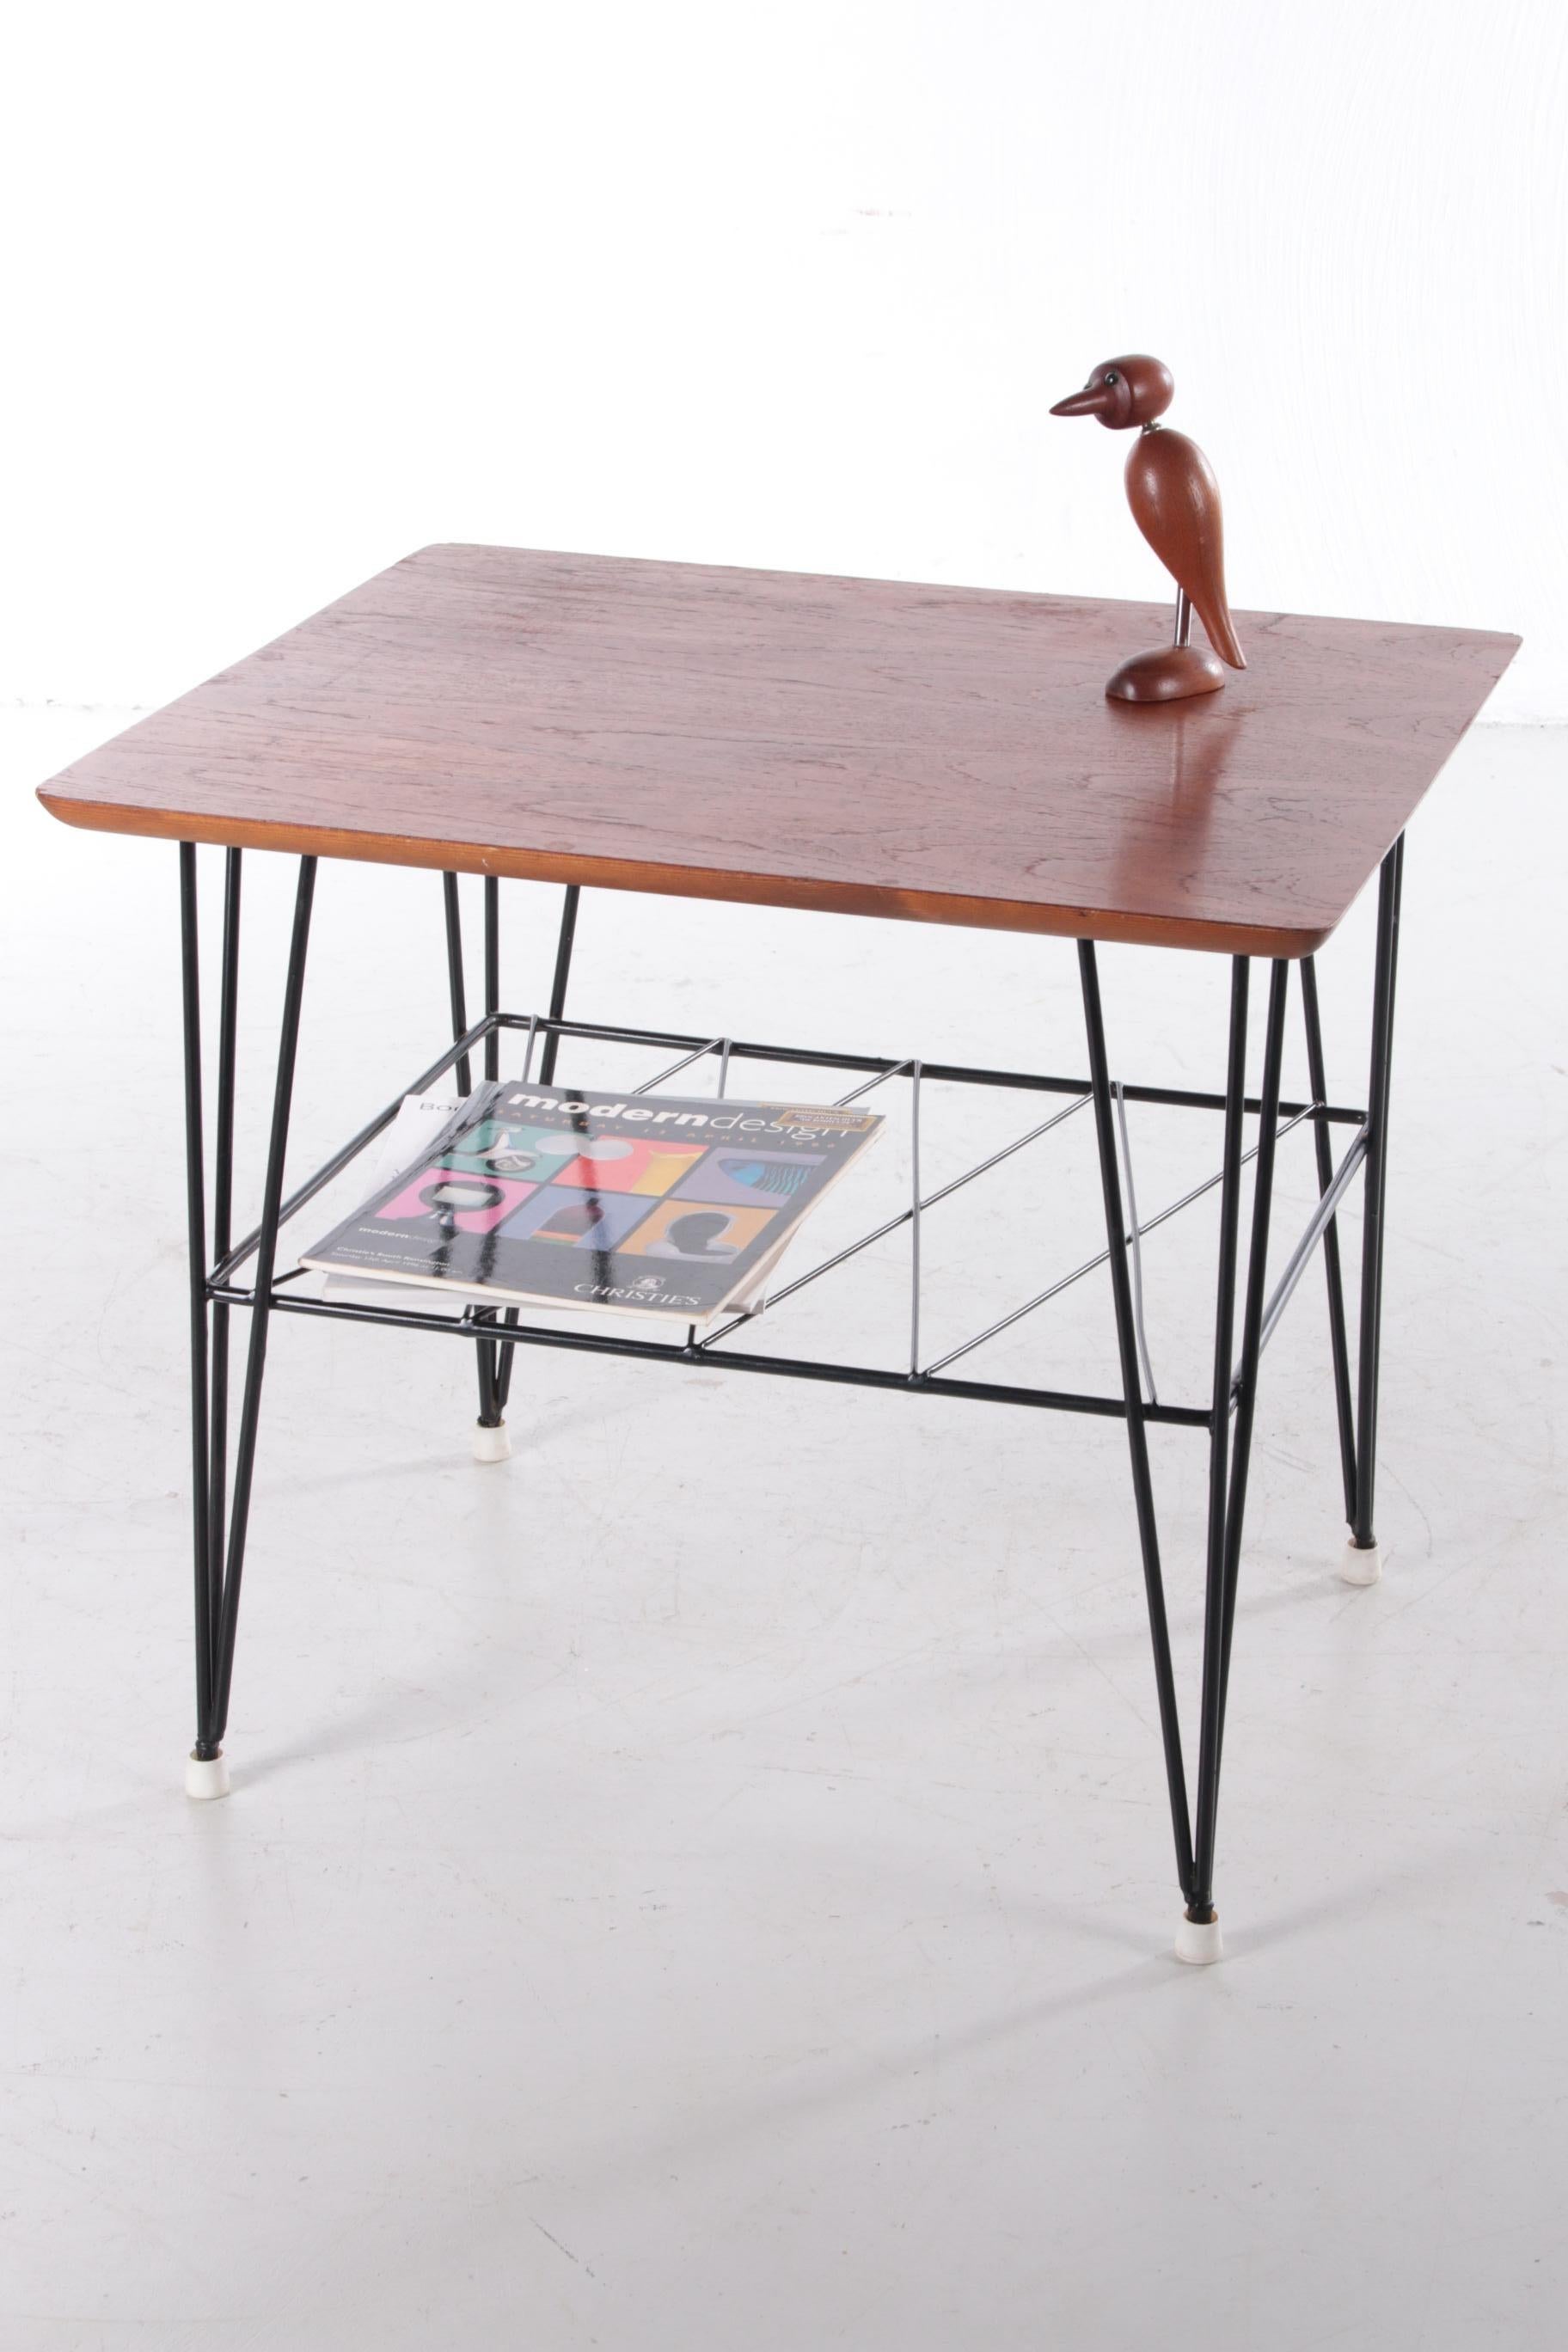 Vintage Black metal string coffee table from Sweden, 1960


Vintage teak coffee table with black metal string and black legs and beautiful rack.

Made in Sweden in the 1960s.

Very nice model, this is a very early model from Ikea.

Nice as